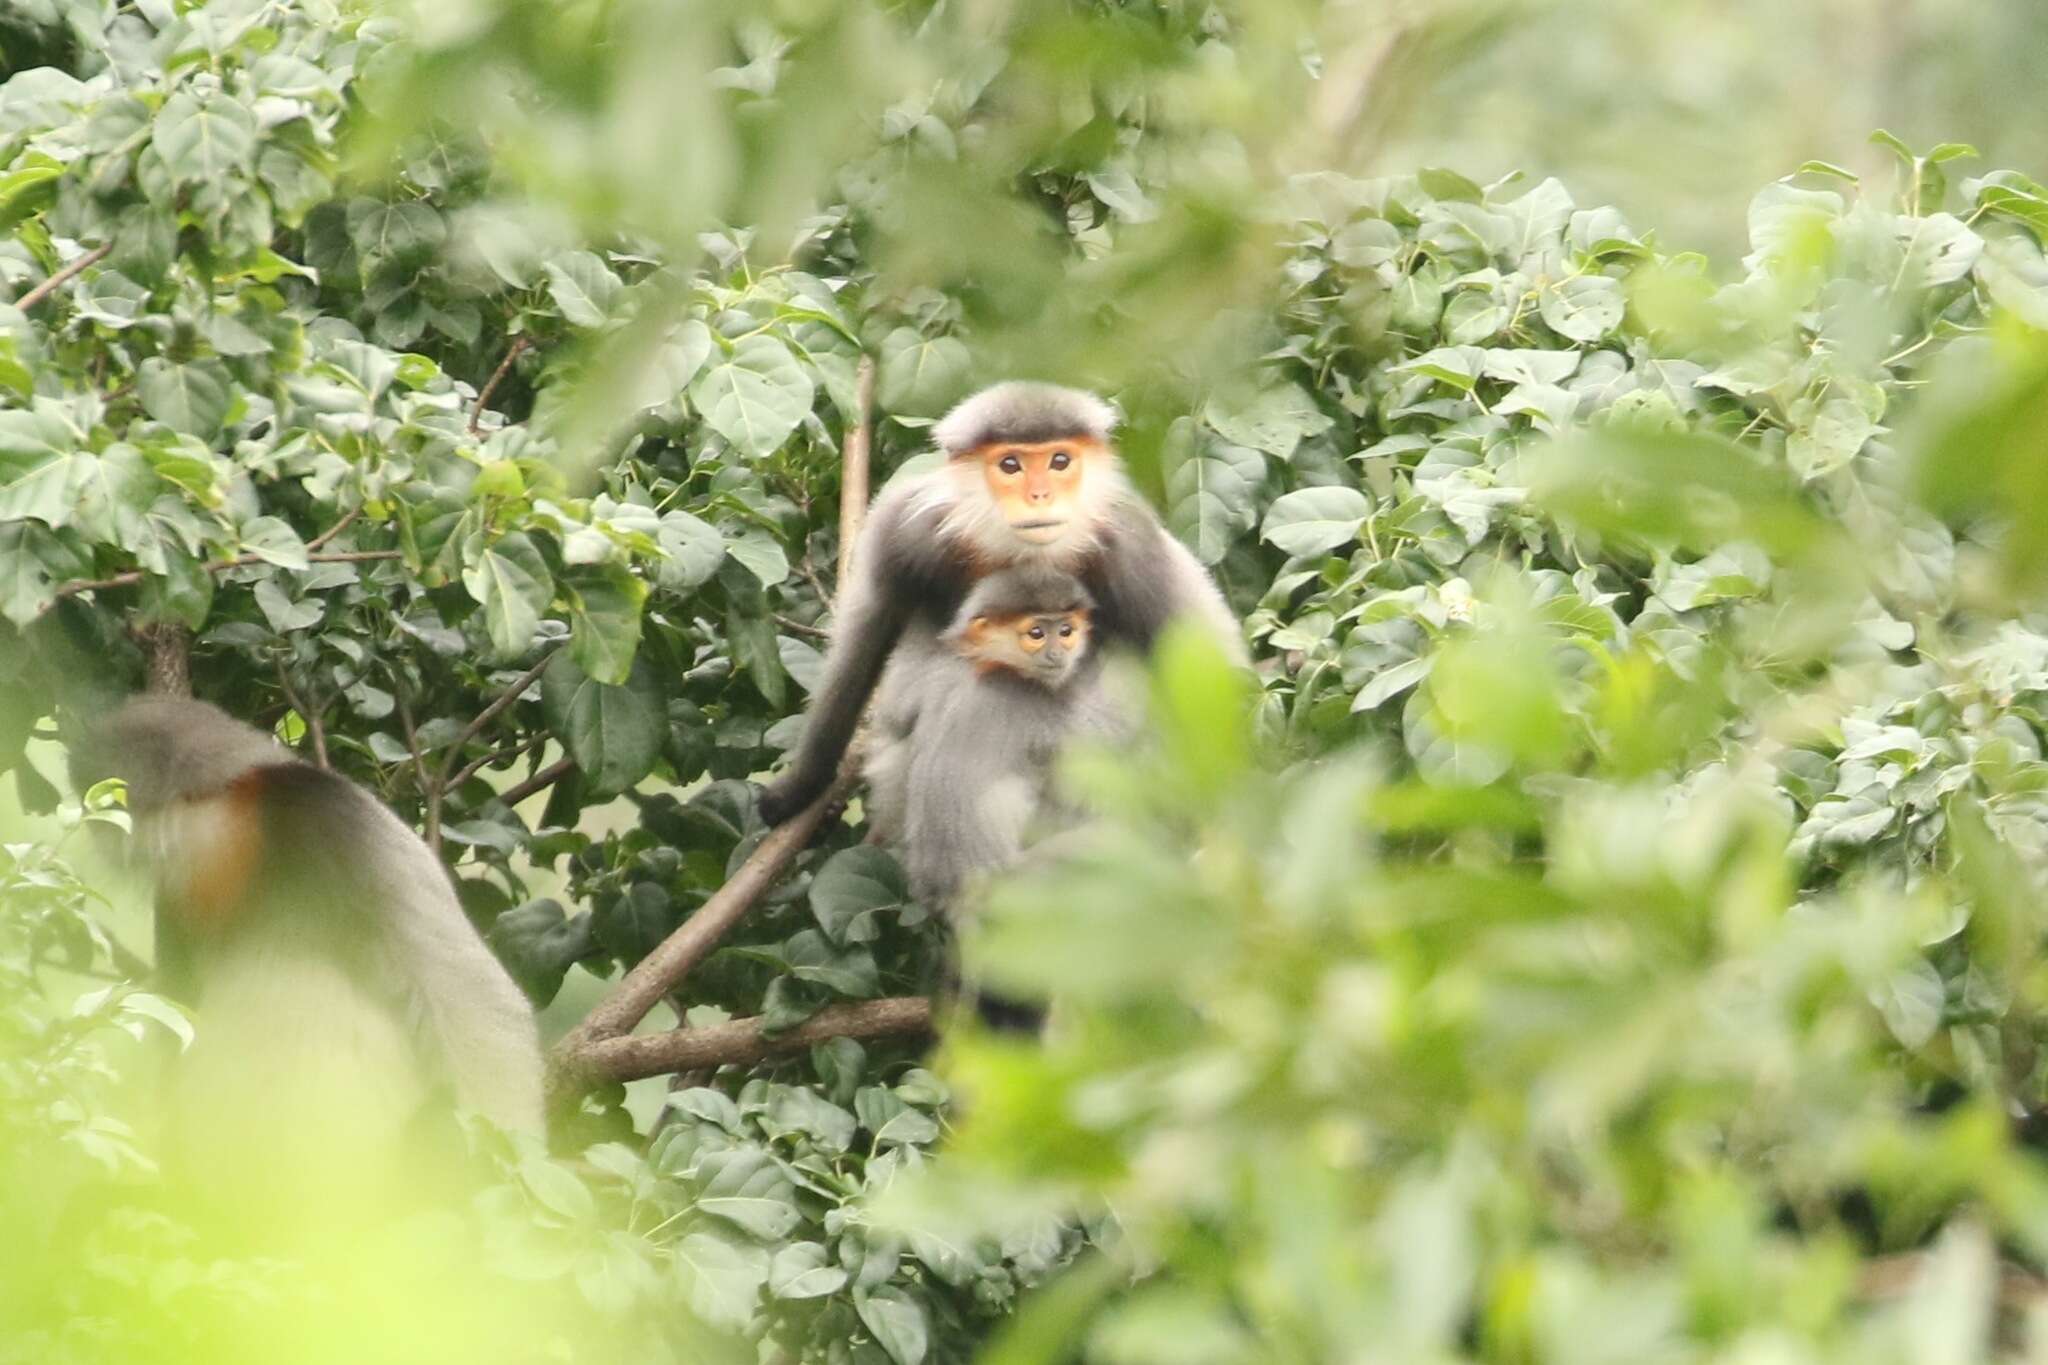 Image of Gray-shanked Douc Langur